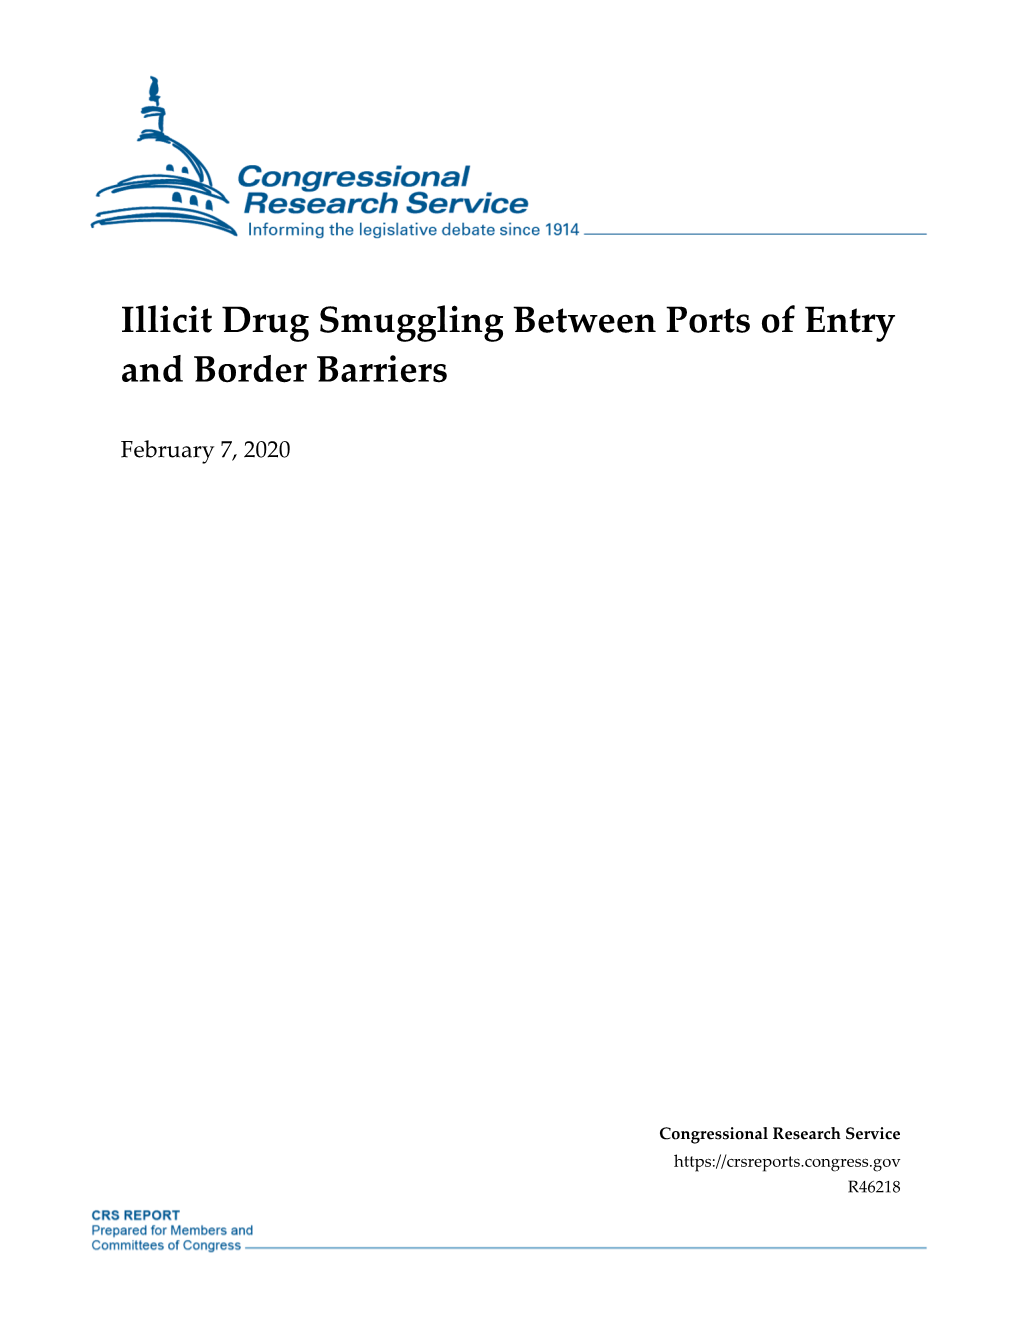 Illicit Drug Smuggling Between Ports of Entry and Border Barriers